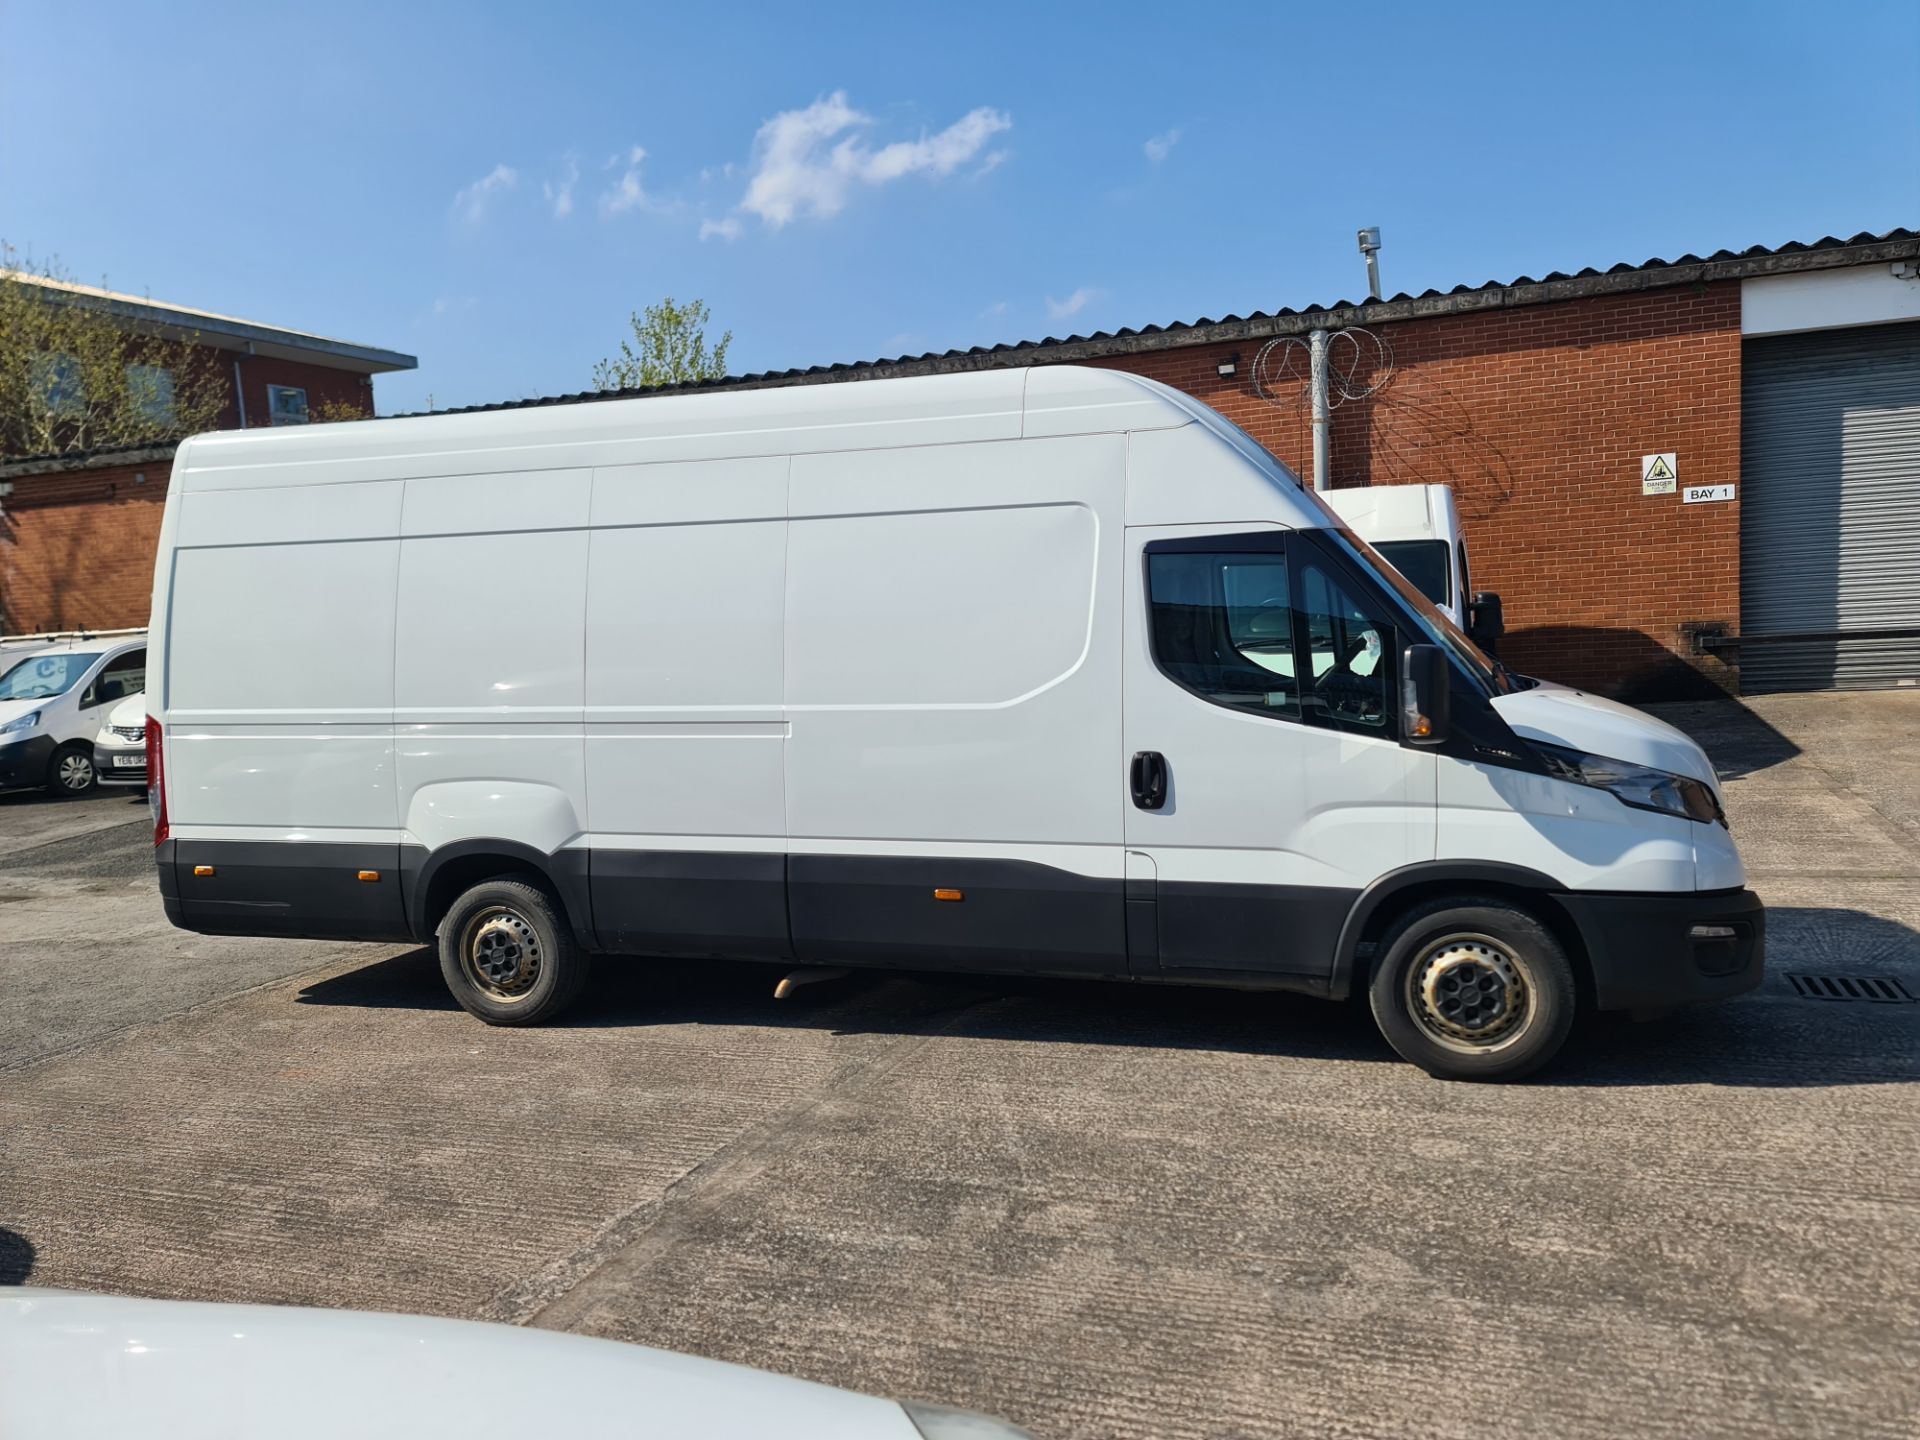 2020 Iveco Daily LWB high roof panel van - Image 8 of 21